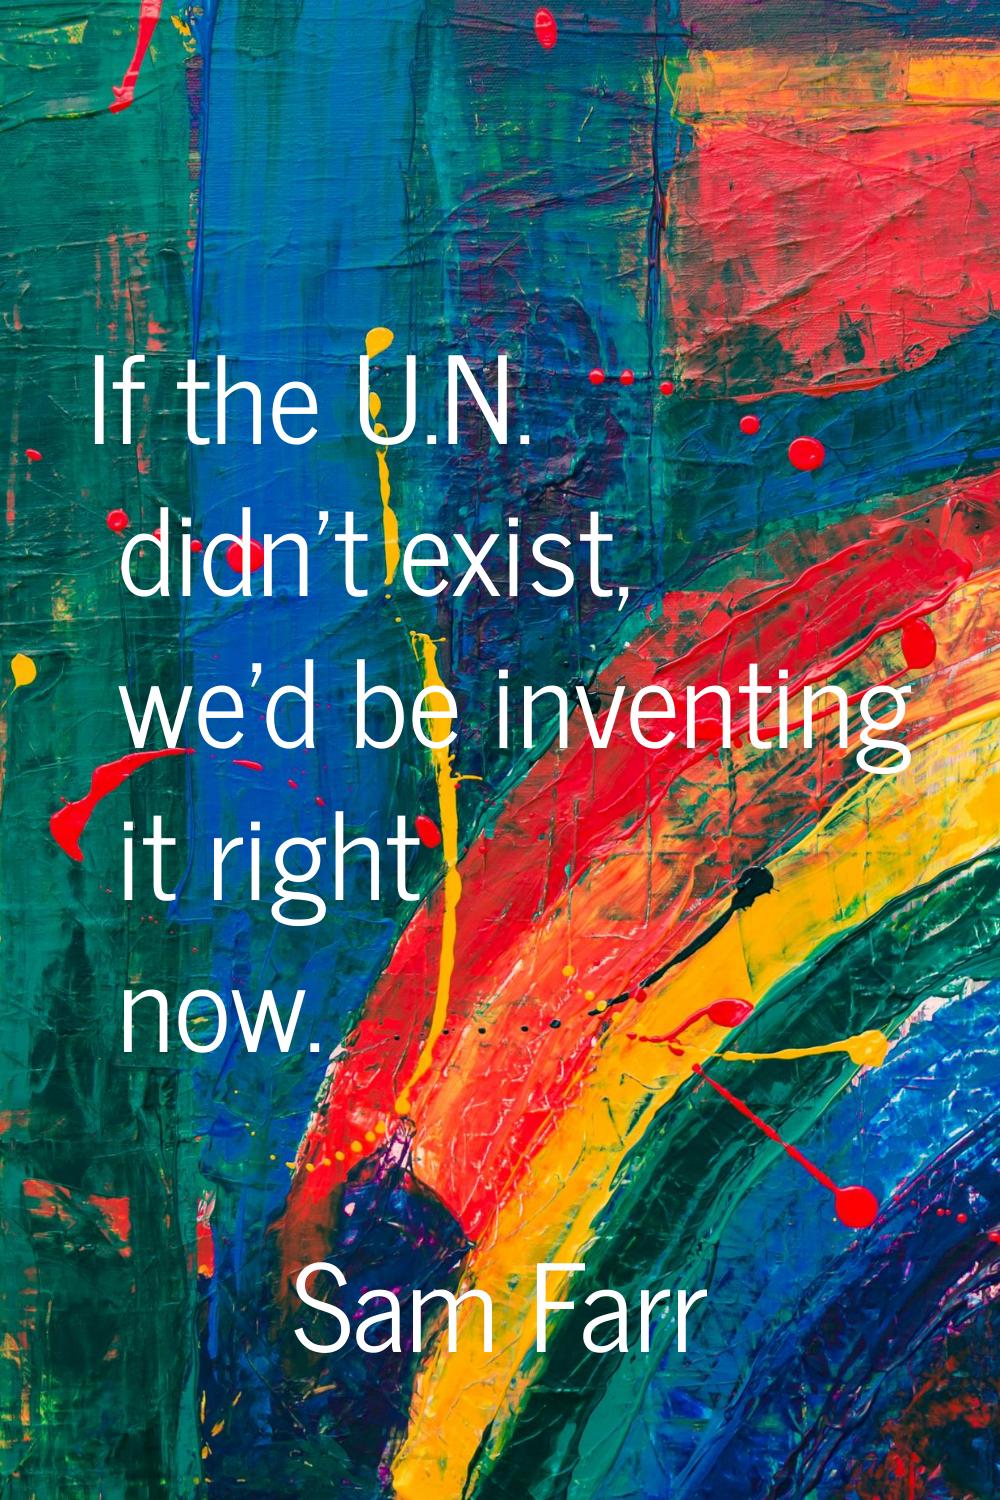 If the U.N. didn't exist, we'd be inventing it right now.